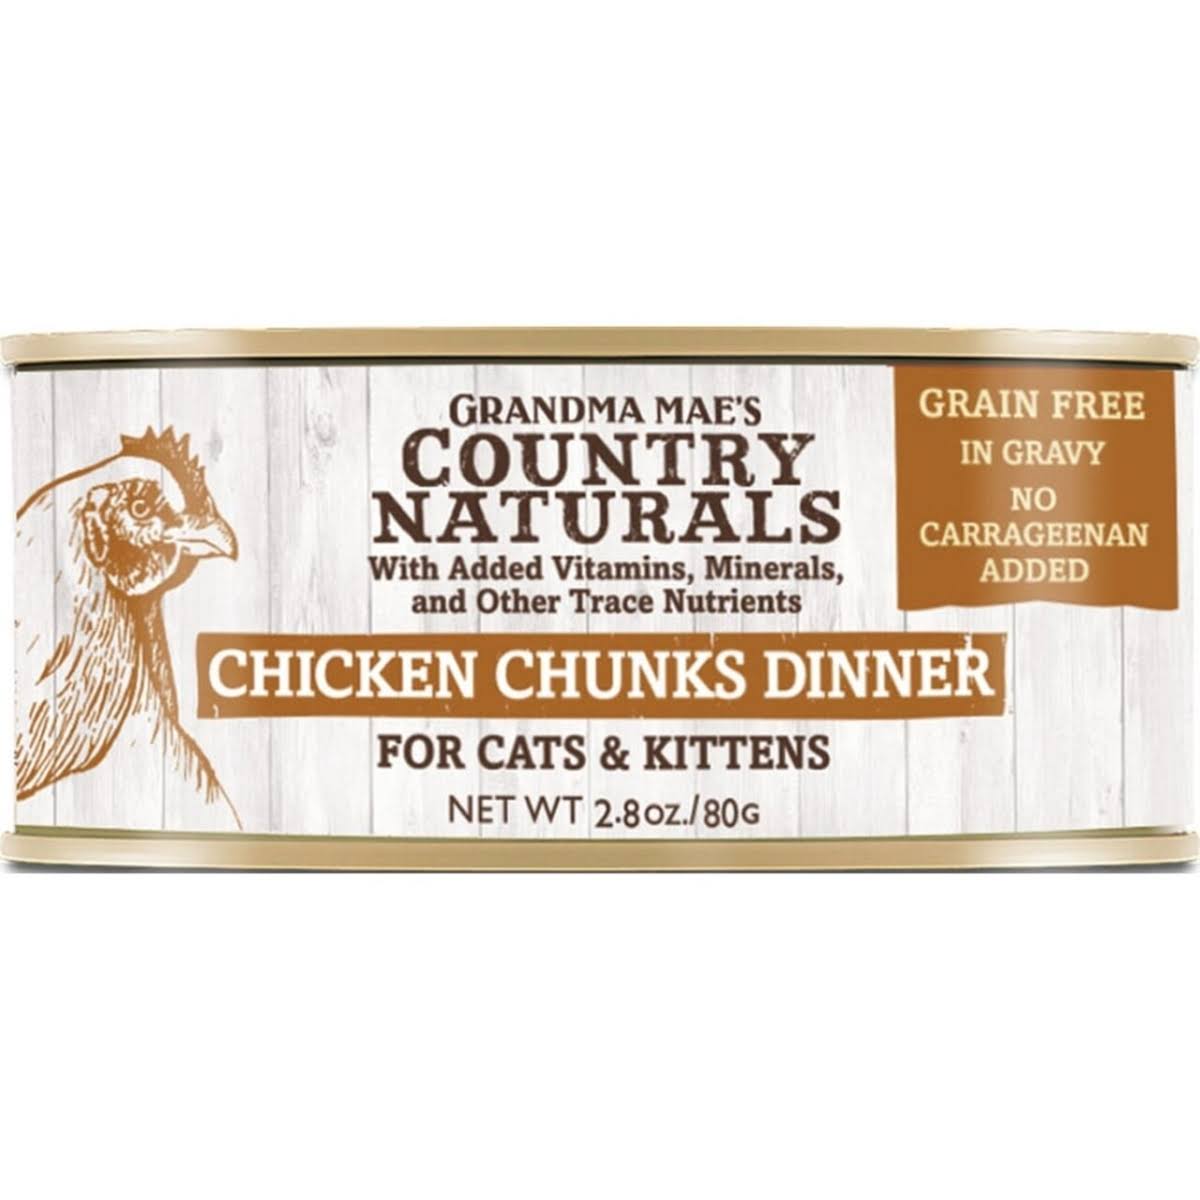 Country Naturals Grain Free Cat and Kitten Food - Chicken Chunks Dinner, 2.8oz